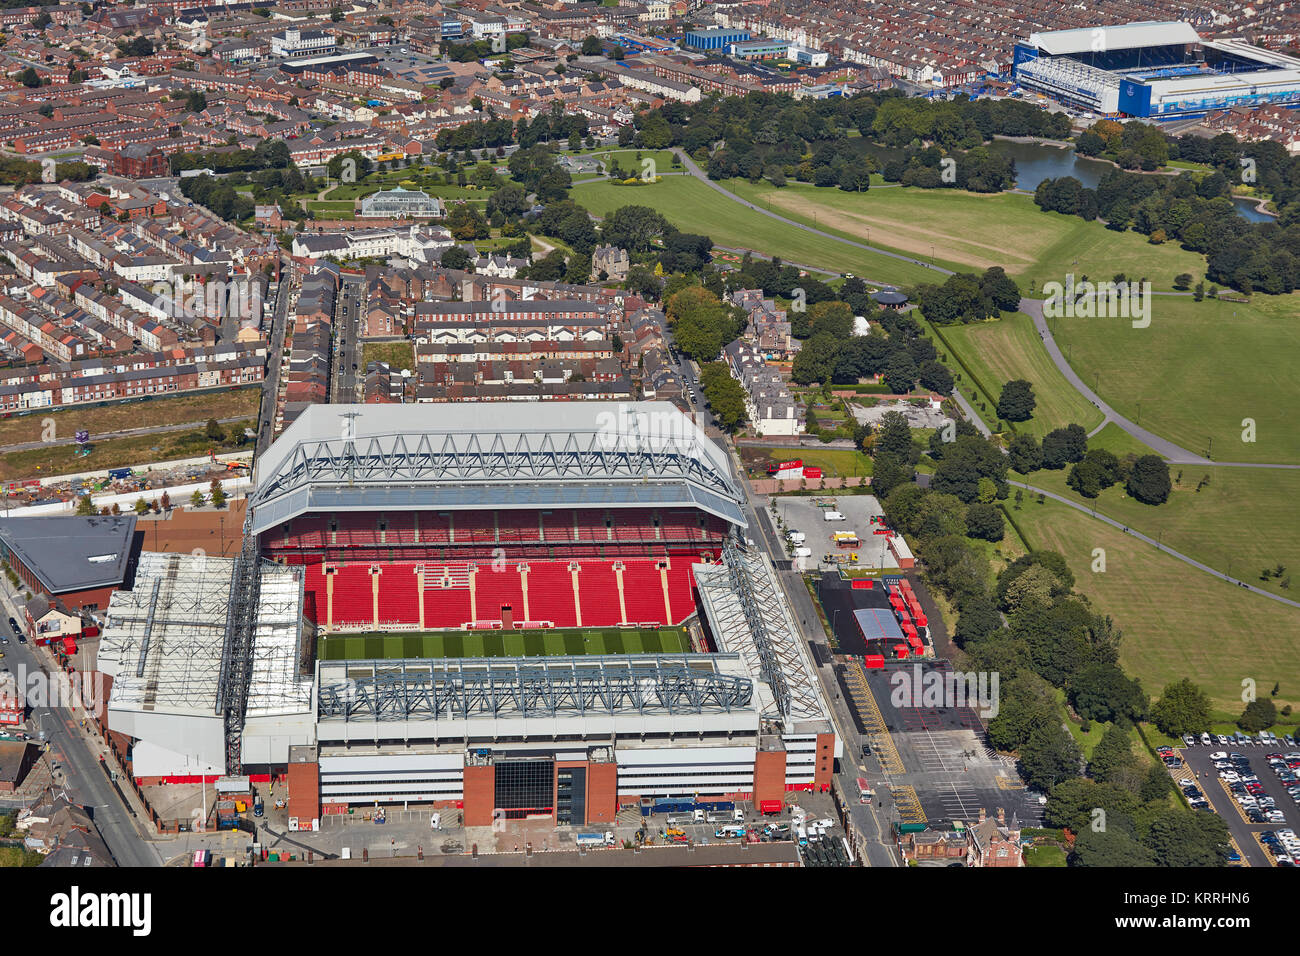 An aerial view of Liverpool showing Anfield in the foreground and Goodison Park in the background Stock Photo